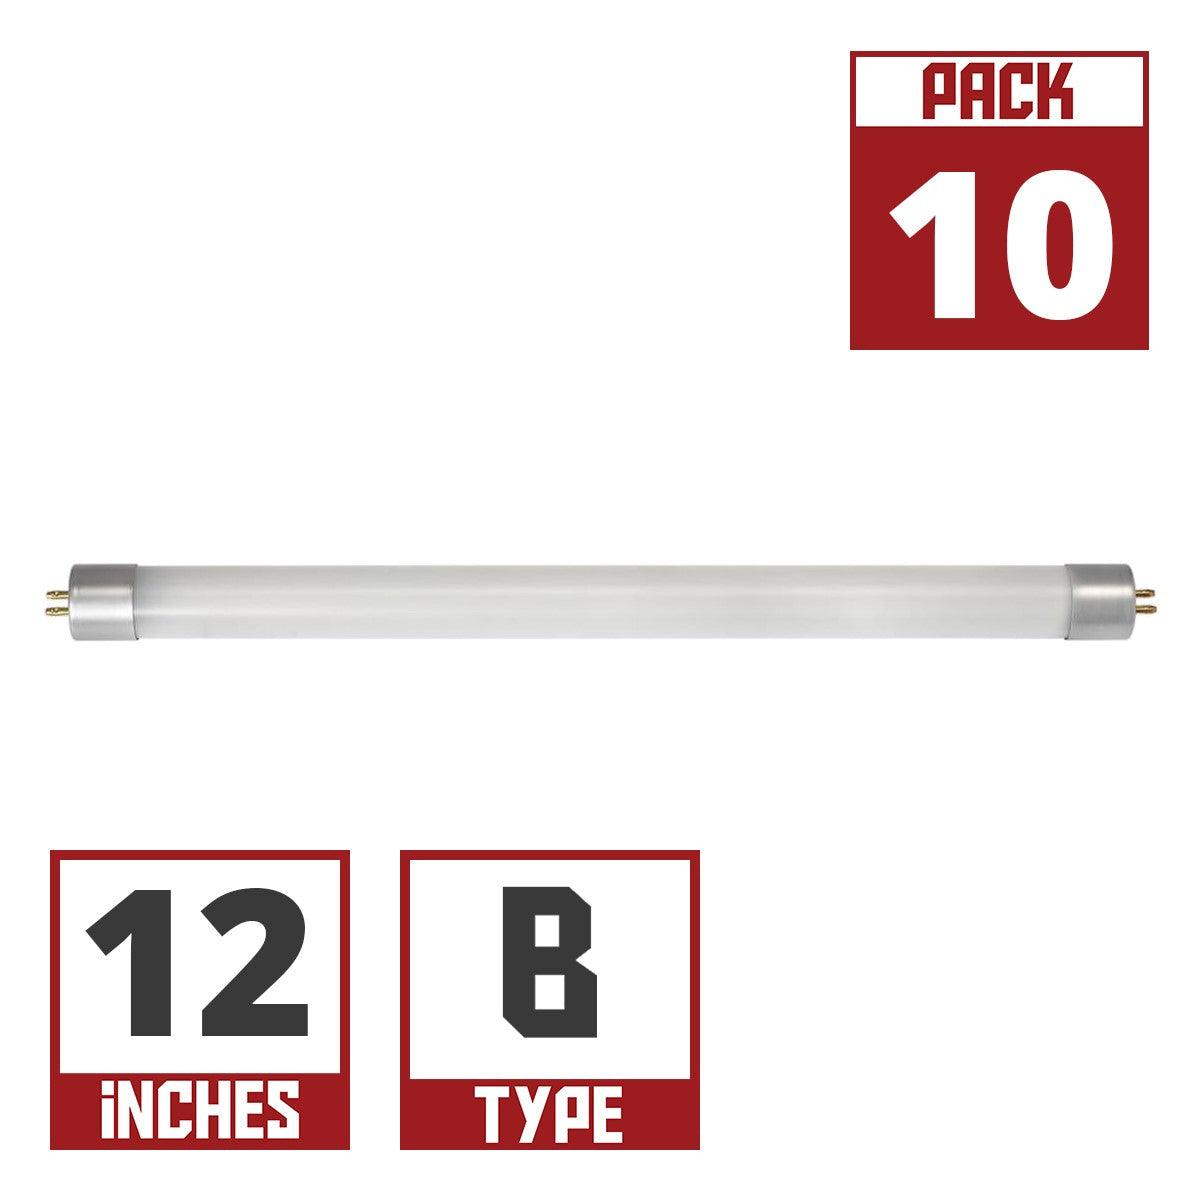 12 Inch LED mini T5 Tube, 4 watt, 400 Lumens, 3000K, F6T5 Replacement, Ballast Bypass Double End, G5 Base (Case Of 10) - Bees Lighting